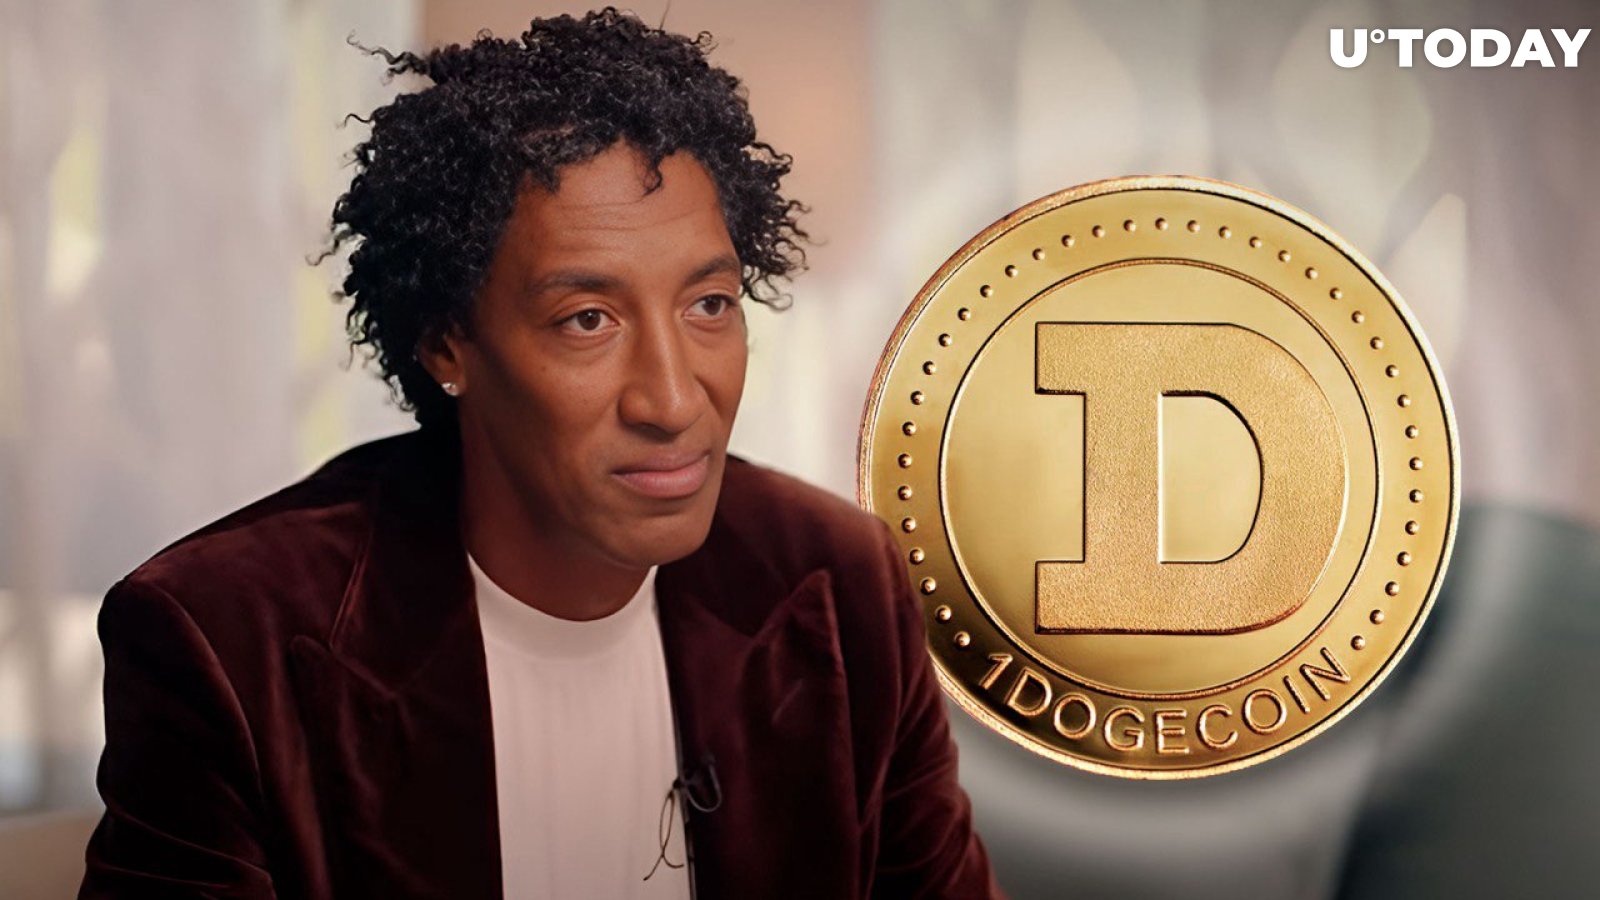 Dogecoin Creator Proposes DOGE to NBA Legend Scottie Pippen